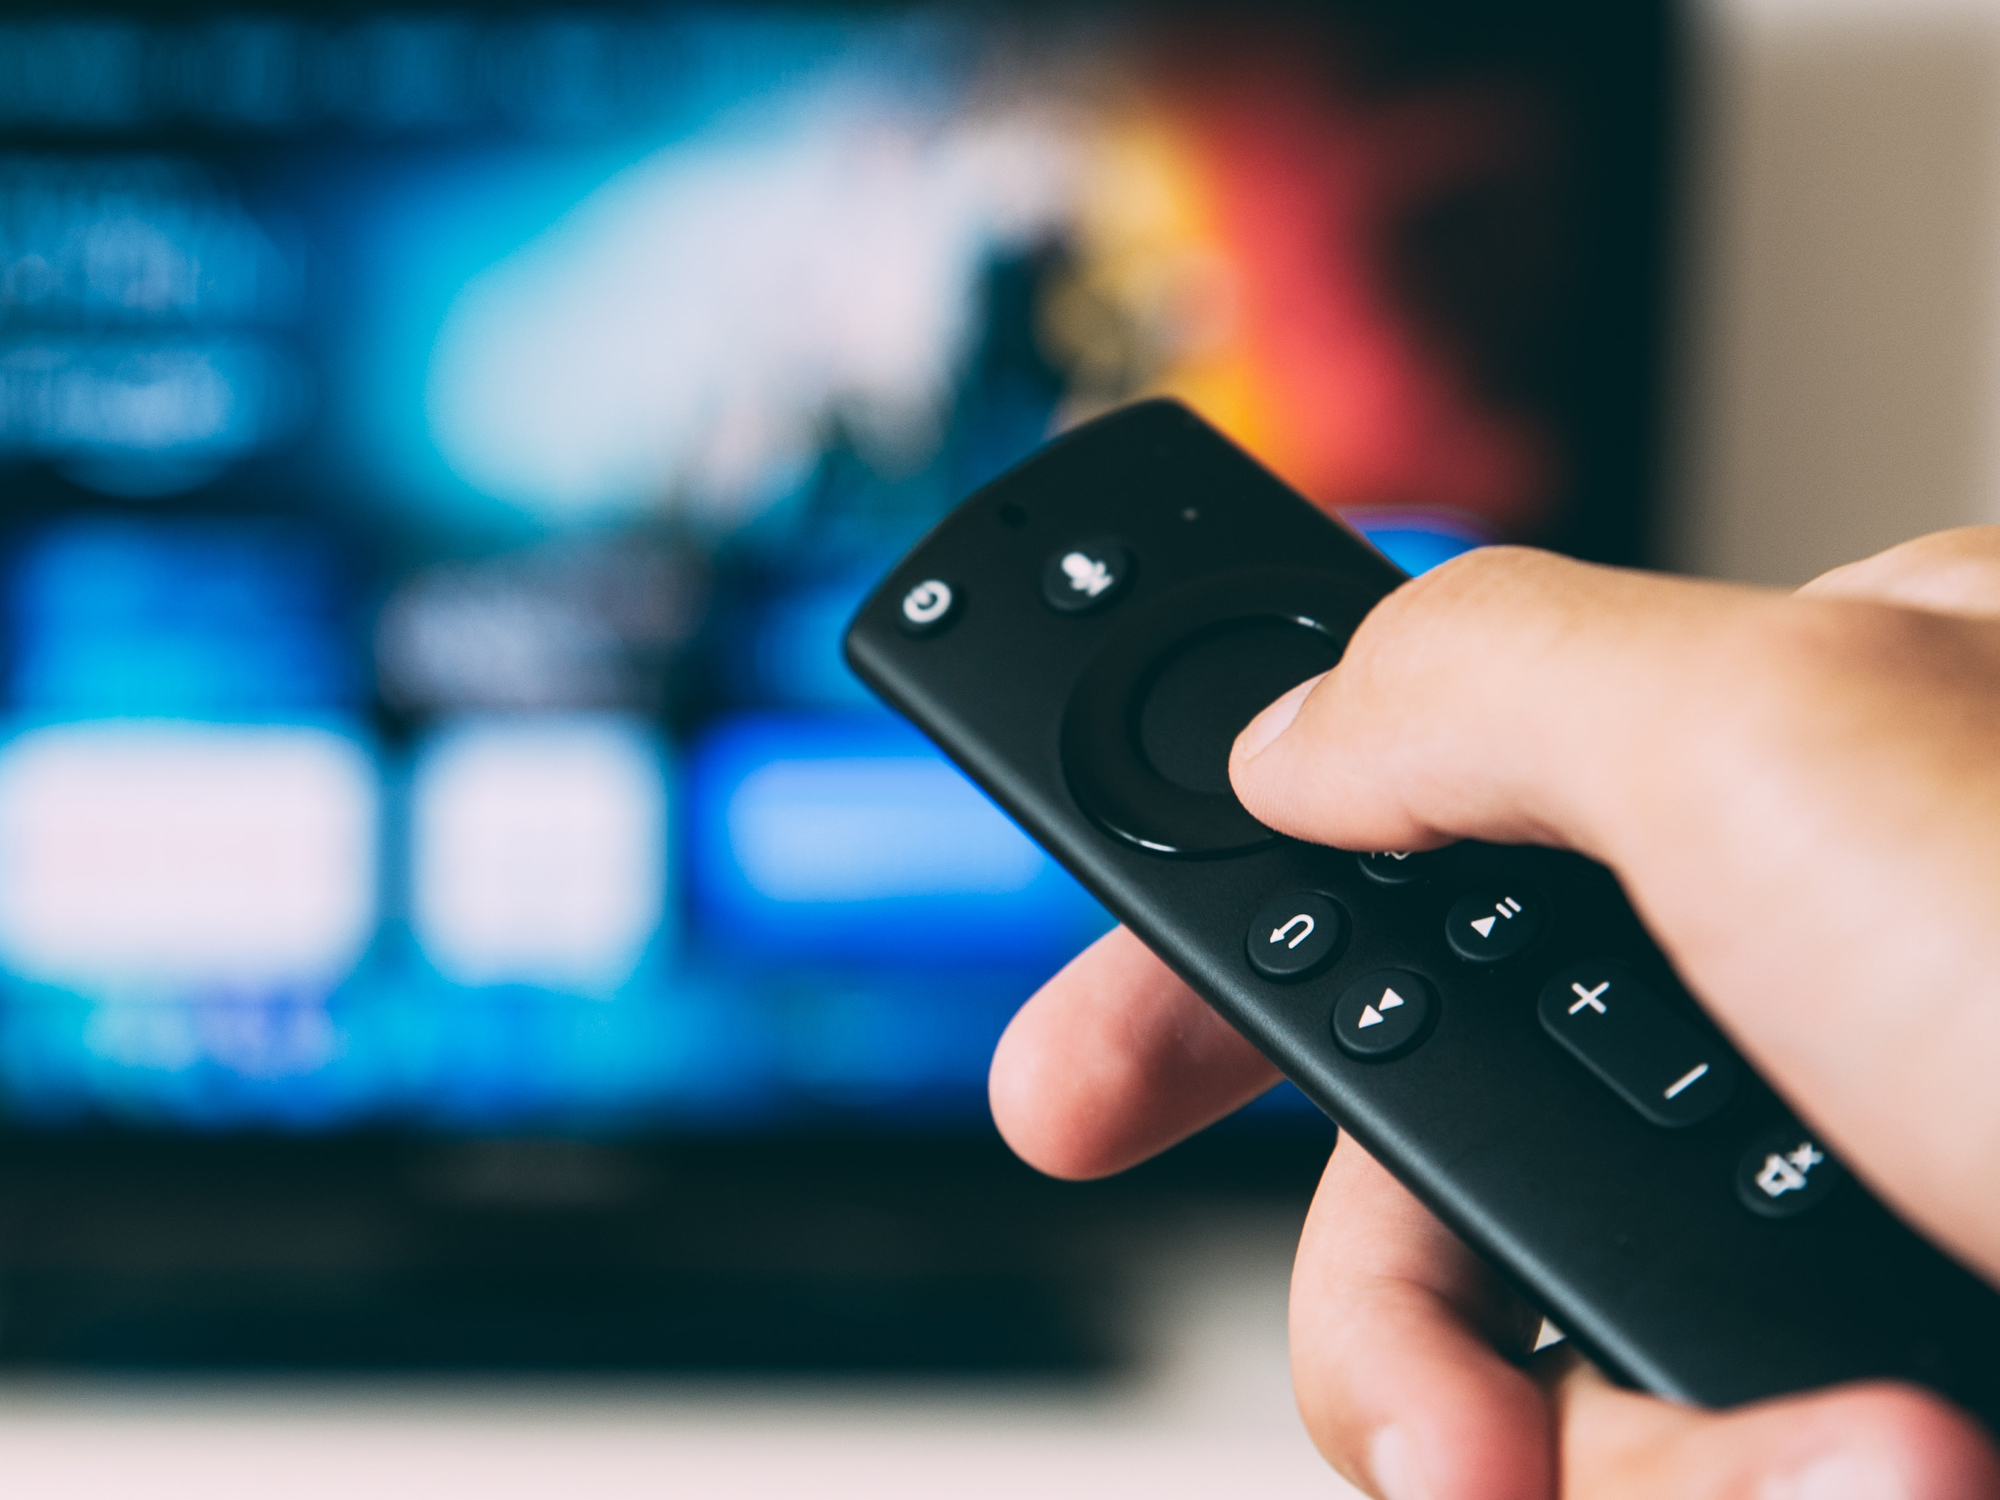 A close-up of a hand holding a TV remote with an out-of-focus TV screen in the background.